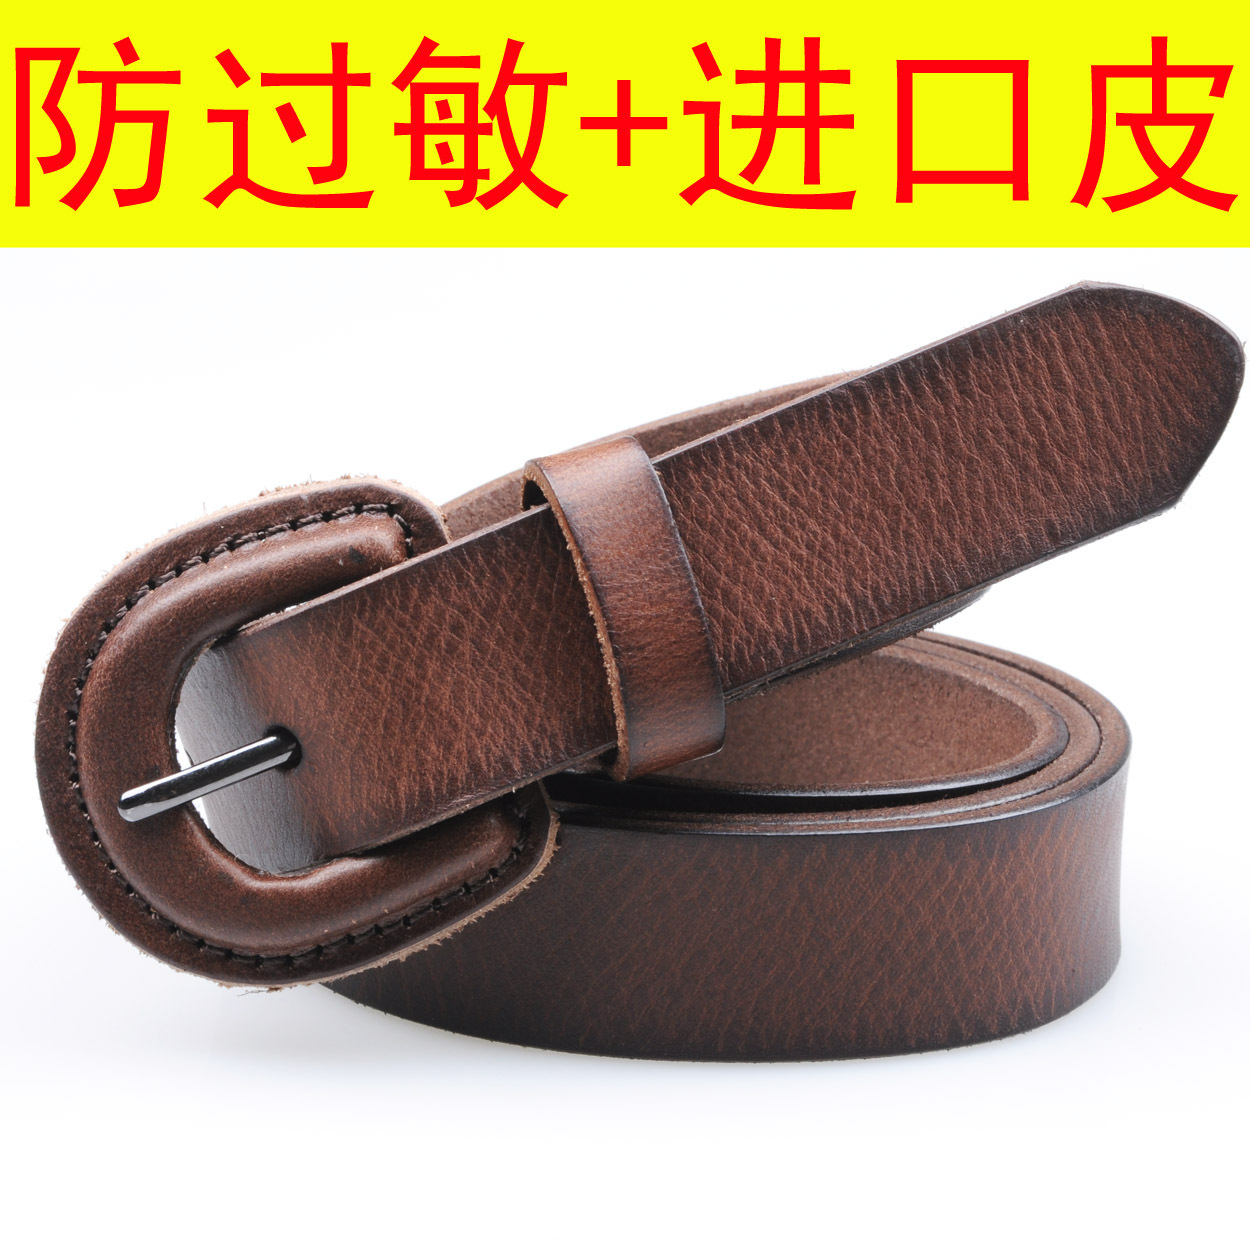 Anti-allergic strap women's first layer of cowhide leather belt genuine leather buckle on pin buckle